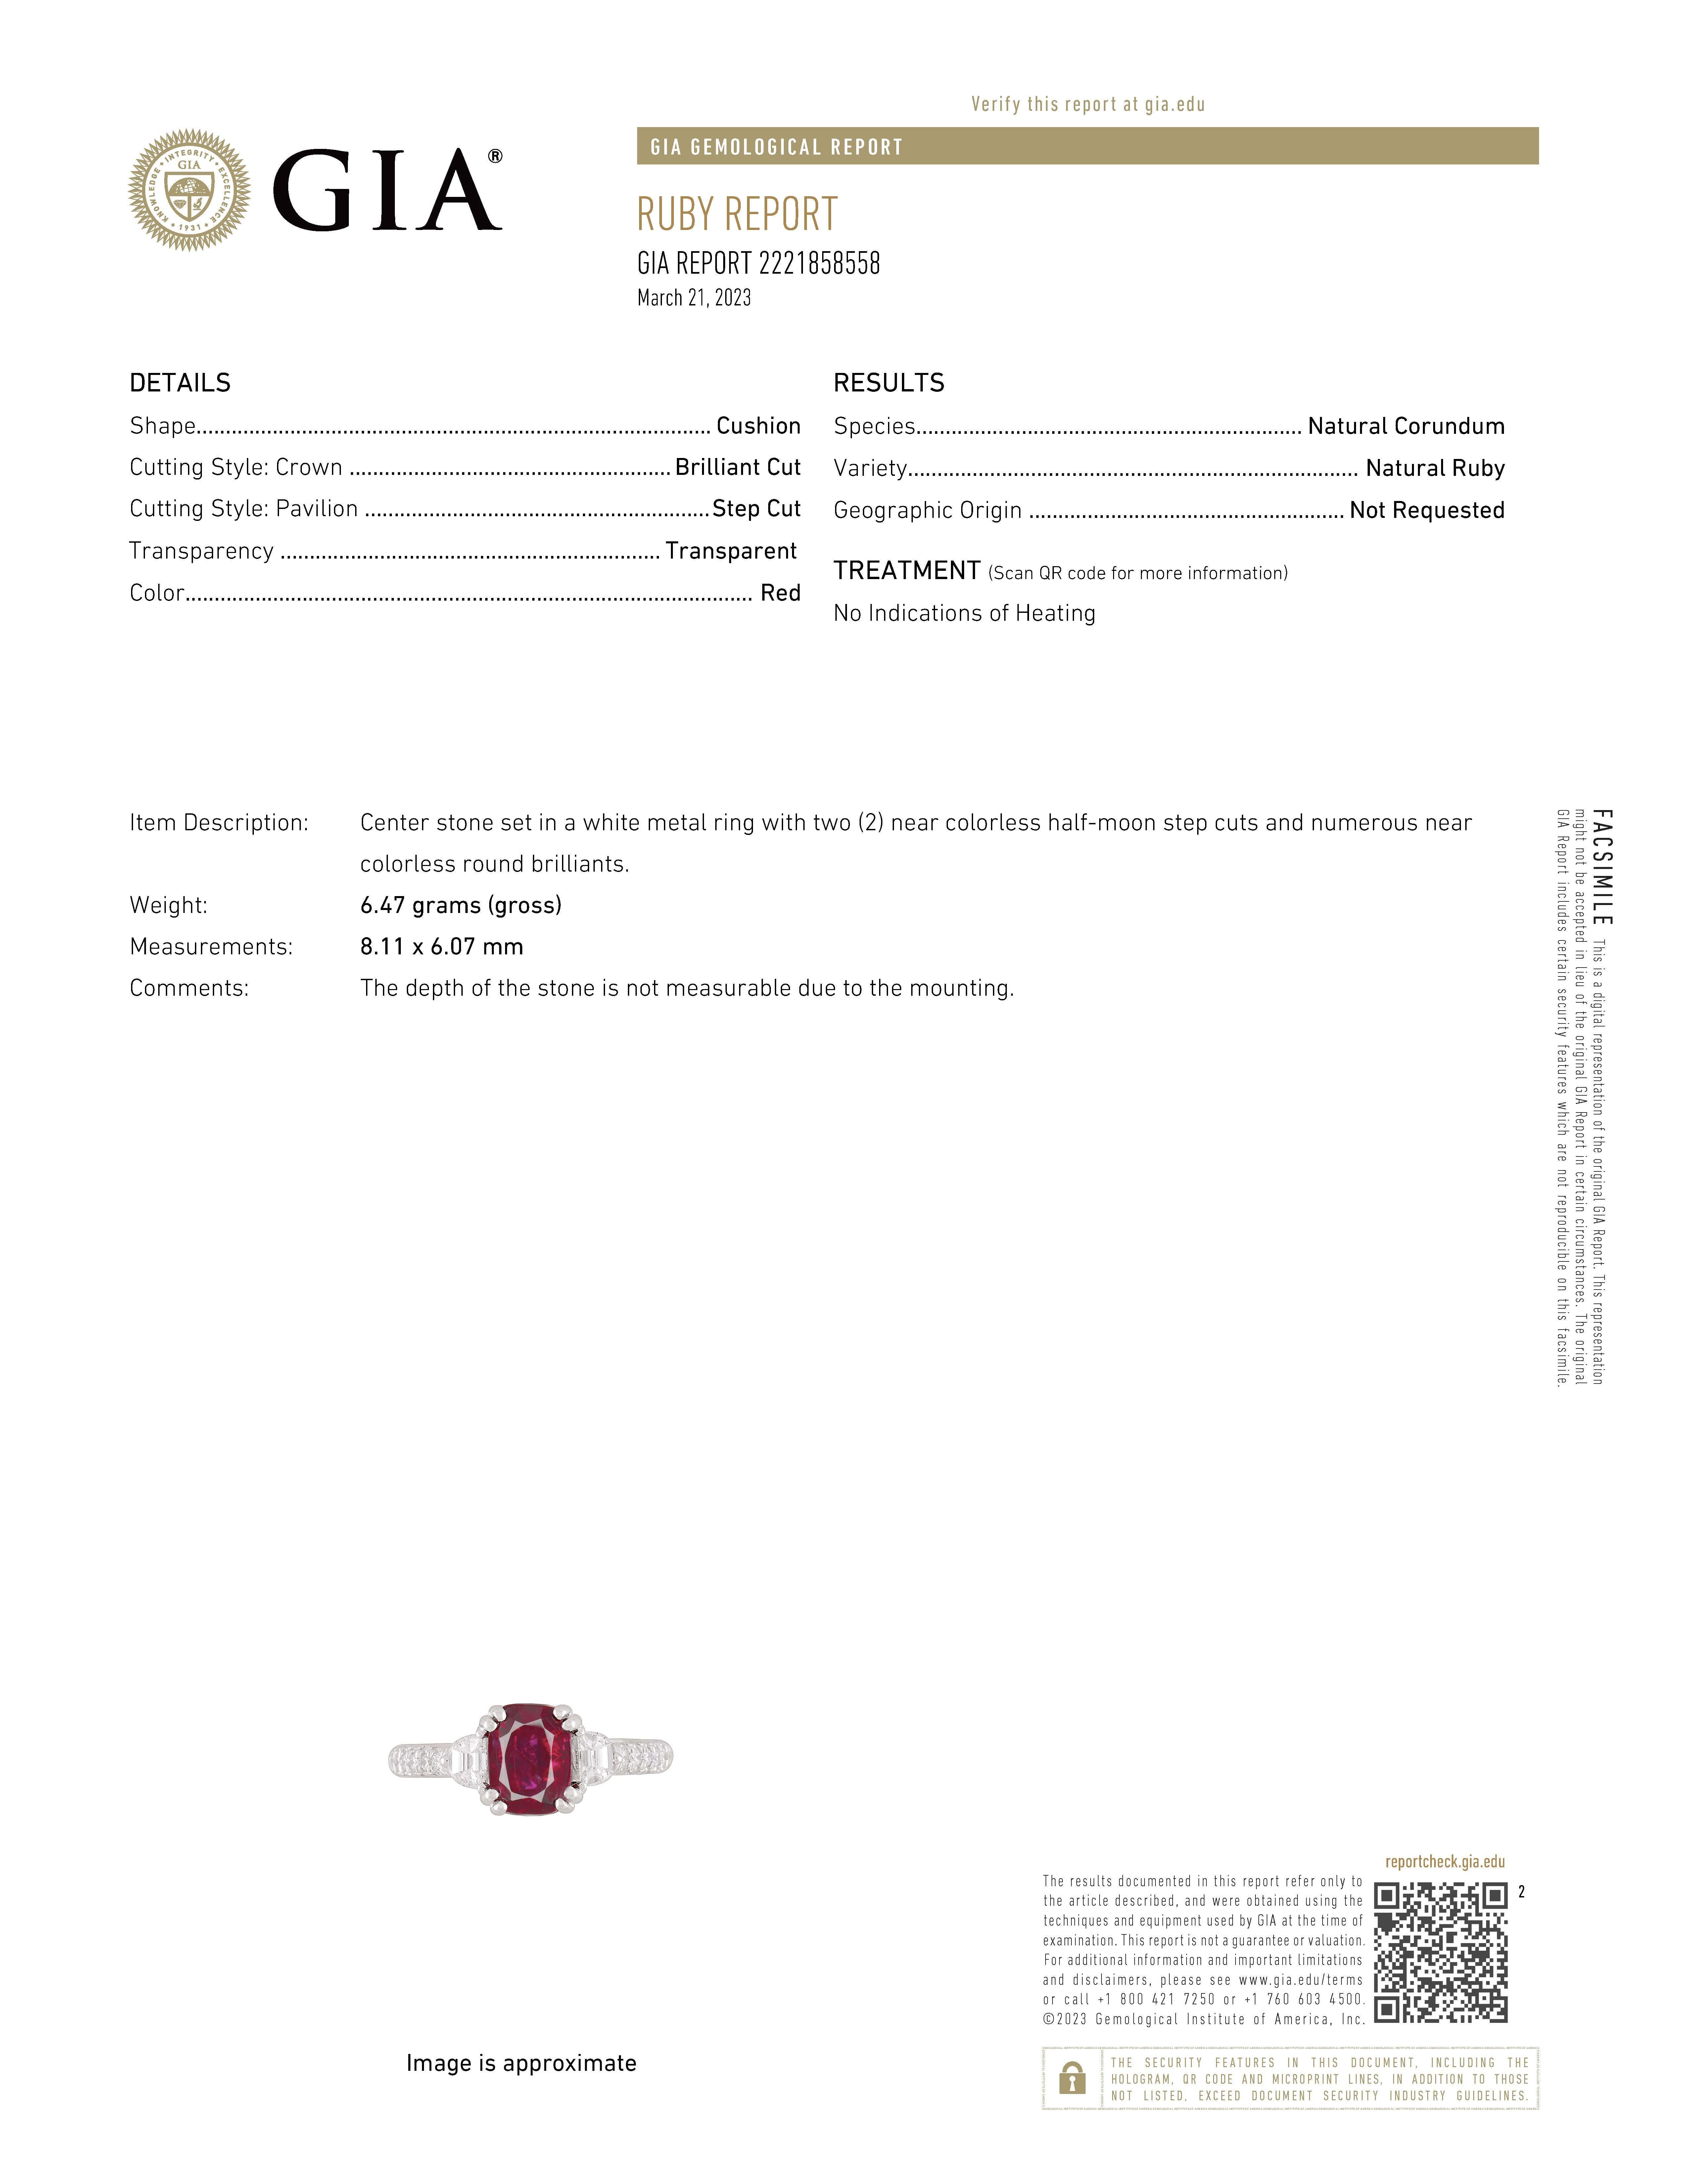 Introducing a truly exquisite and one-of-a-kind cocktail ring, adorned with a captivating 1.57-carat cushion-cut ruby, proudly certified by the Gemological Institute of America (GIA) as a NO HEAT gemstone. The GIA certificate (Certificate No: